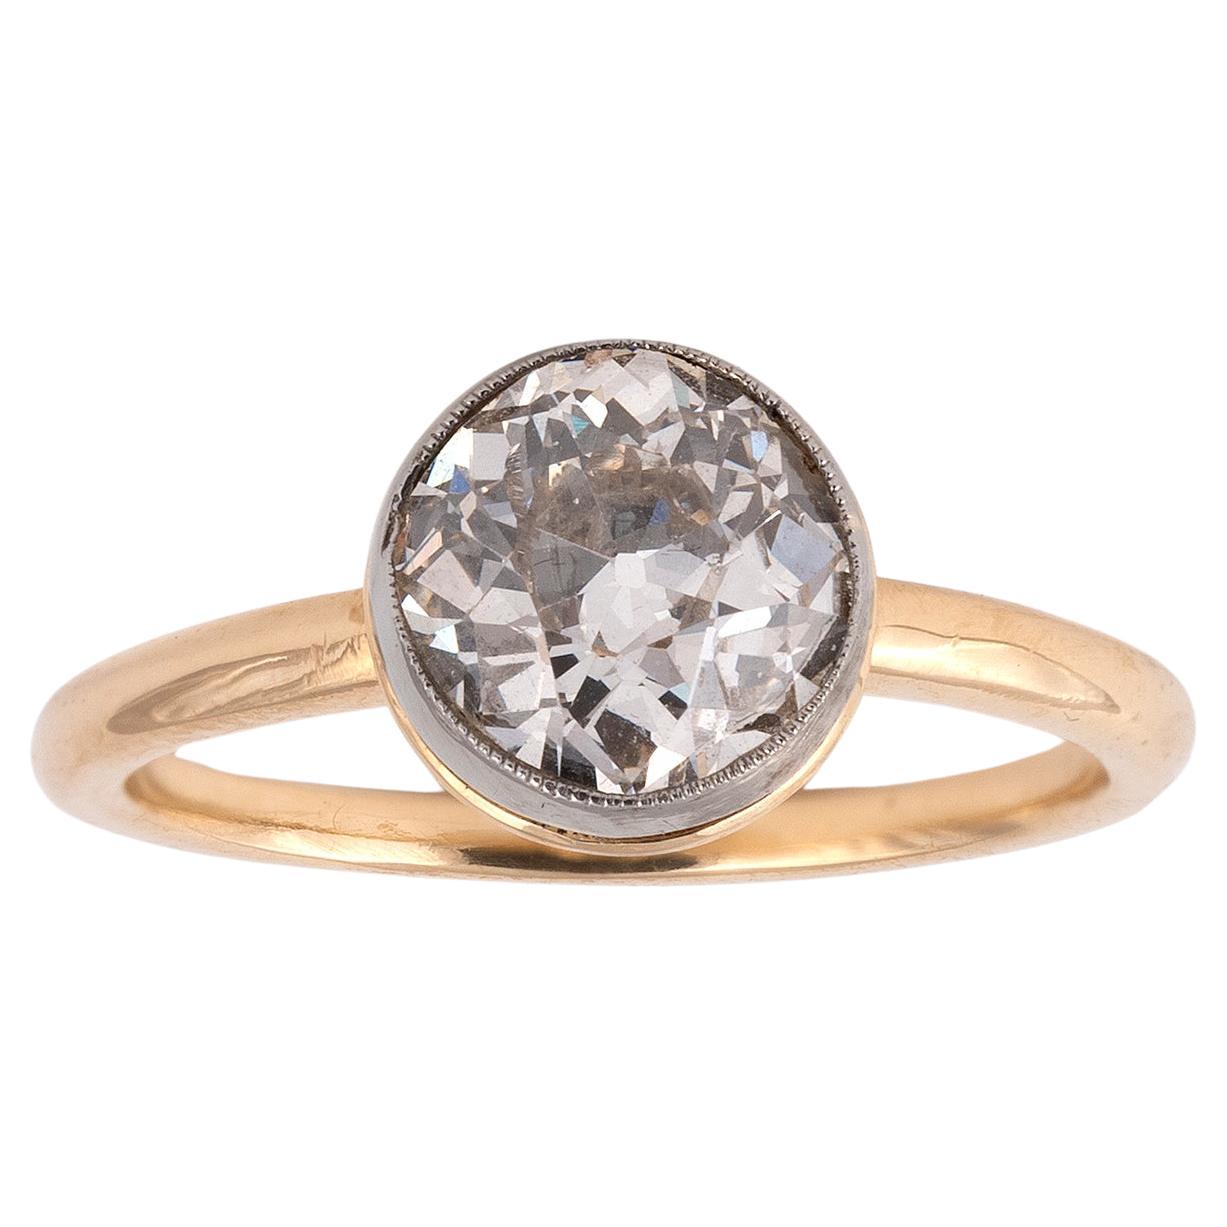 Belle Époque Old Cut Diamond Single-Stone Ring Circa 1920's In Excellent Condition For Sale In Firenze, IT